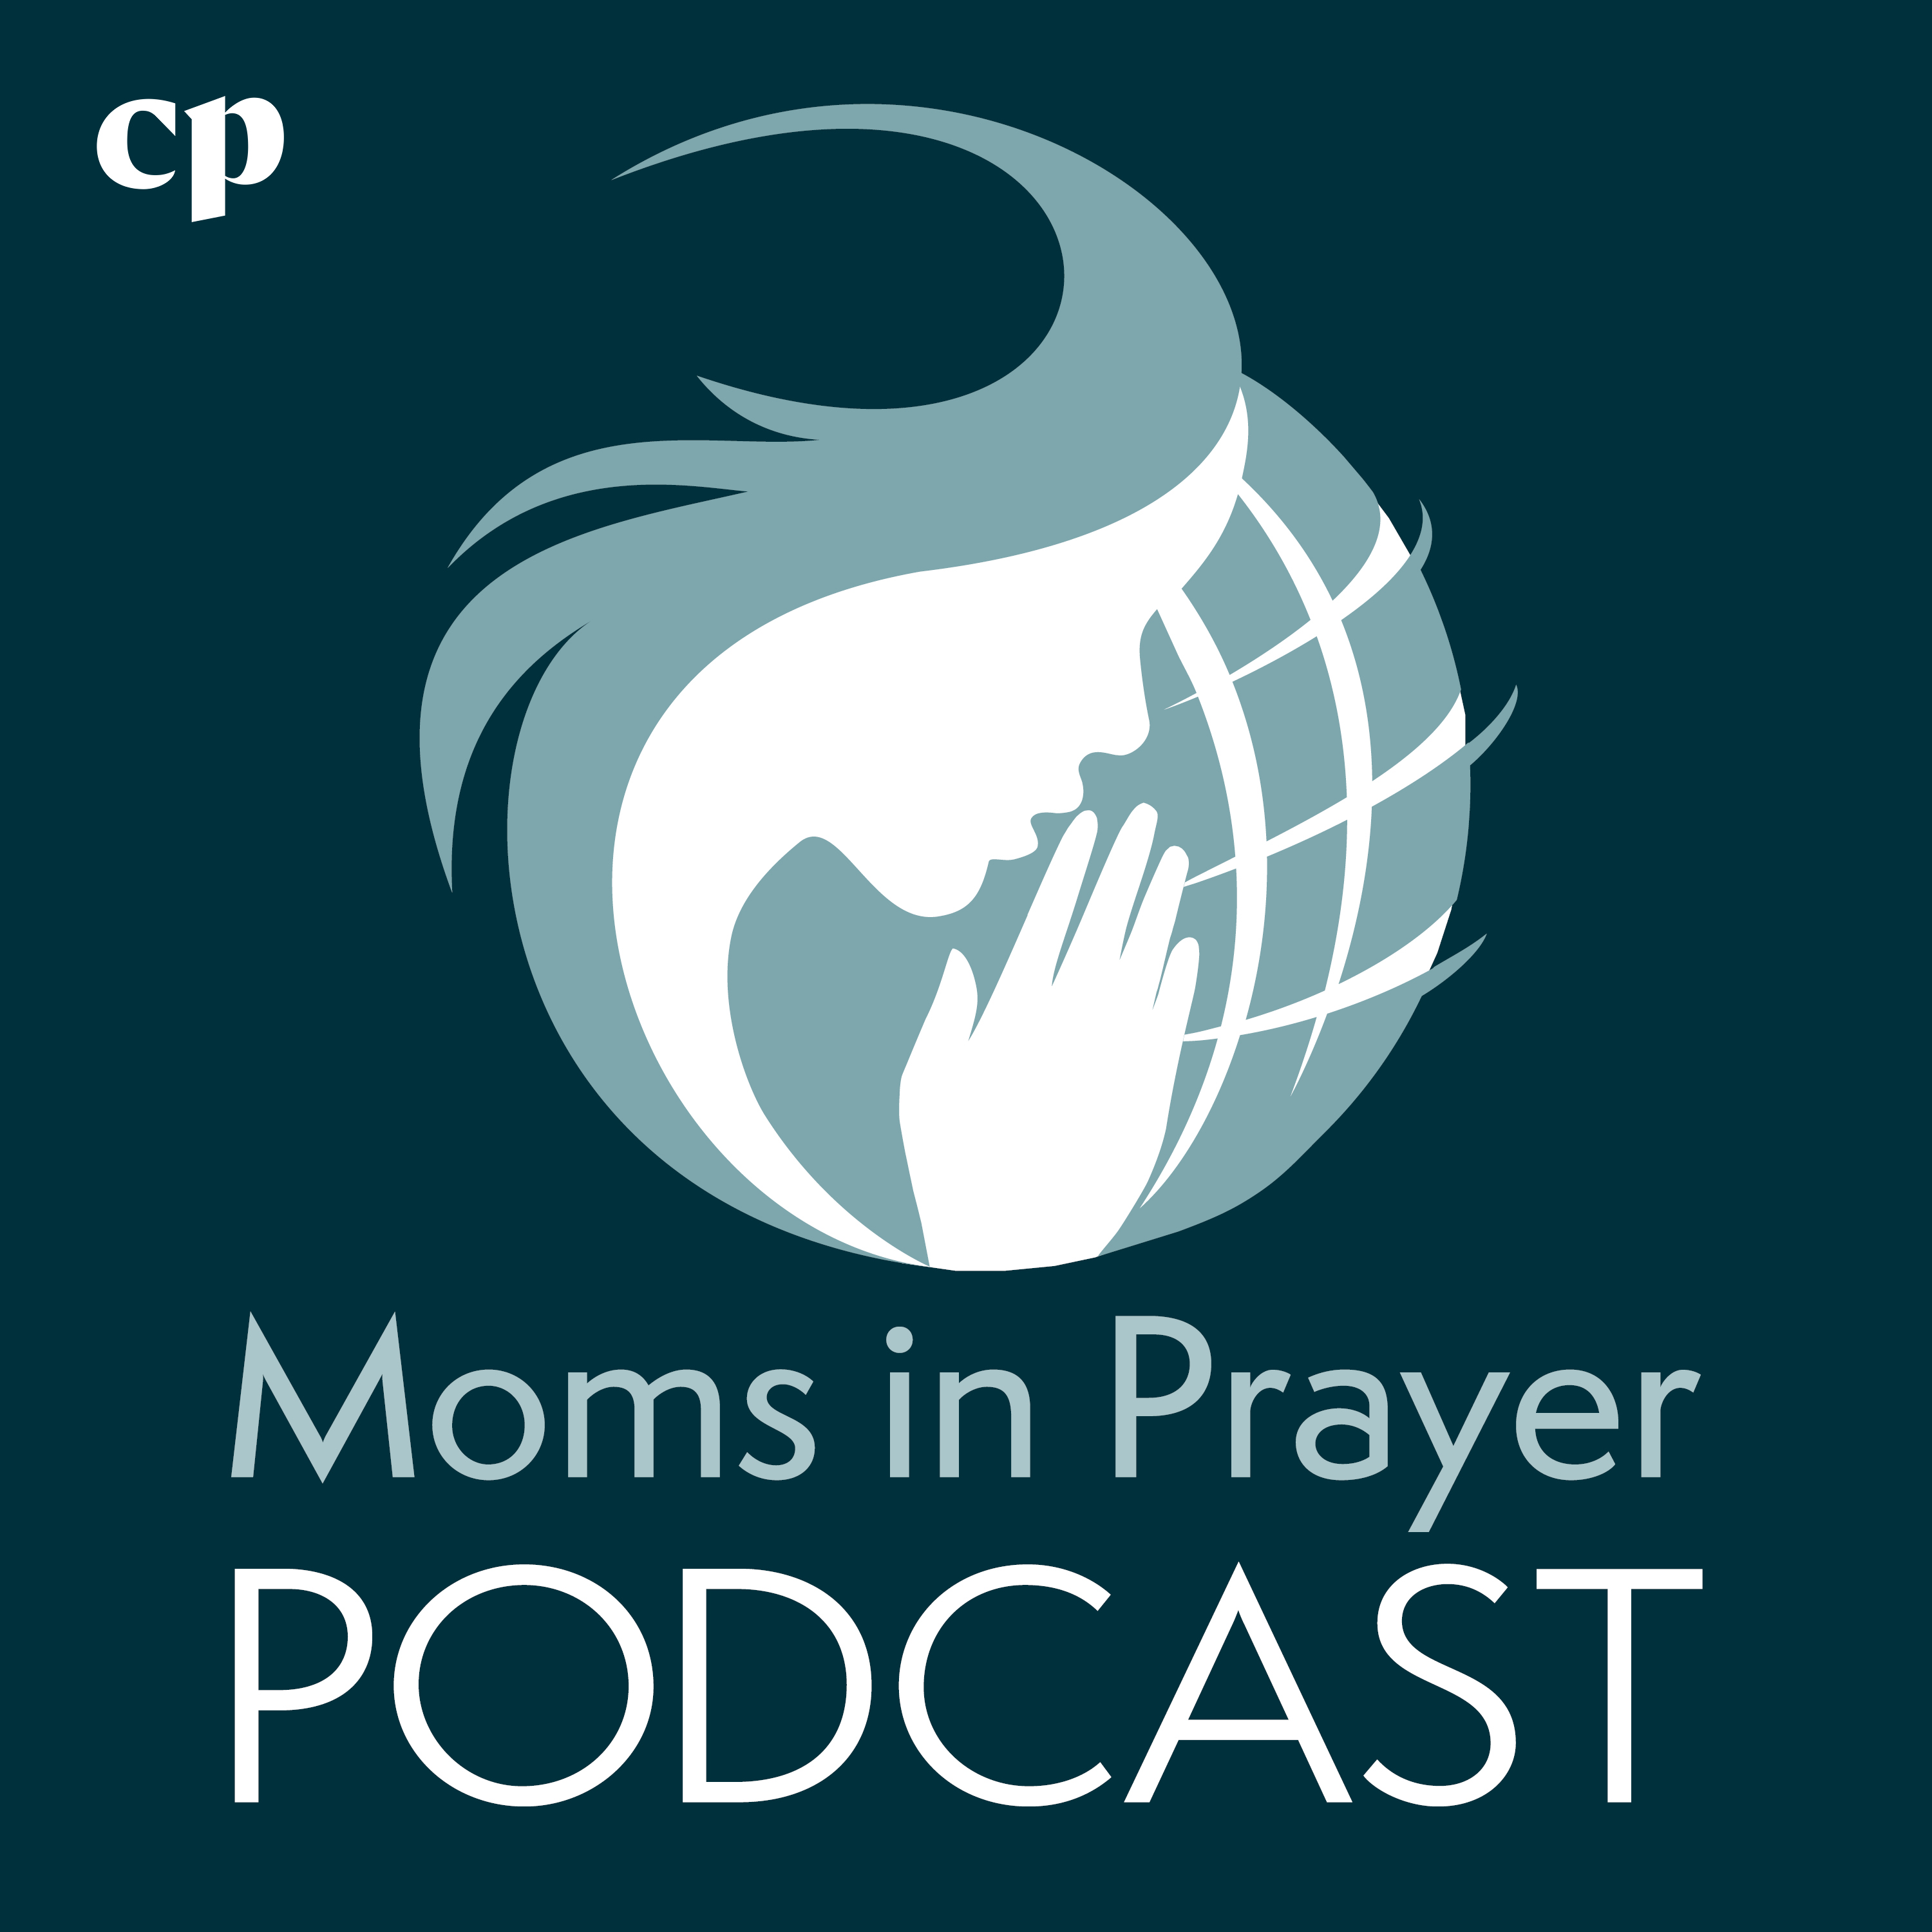 Episode 287 - Grace is Greater with Philip Yancey